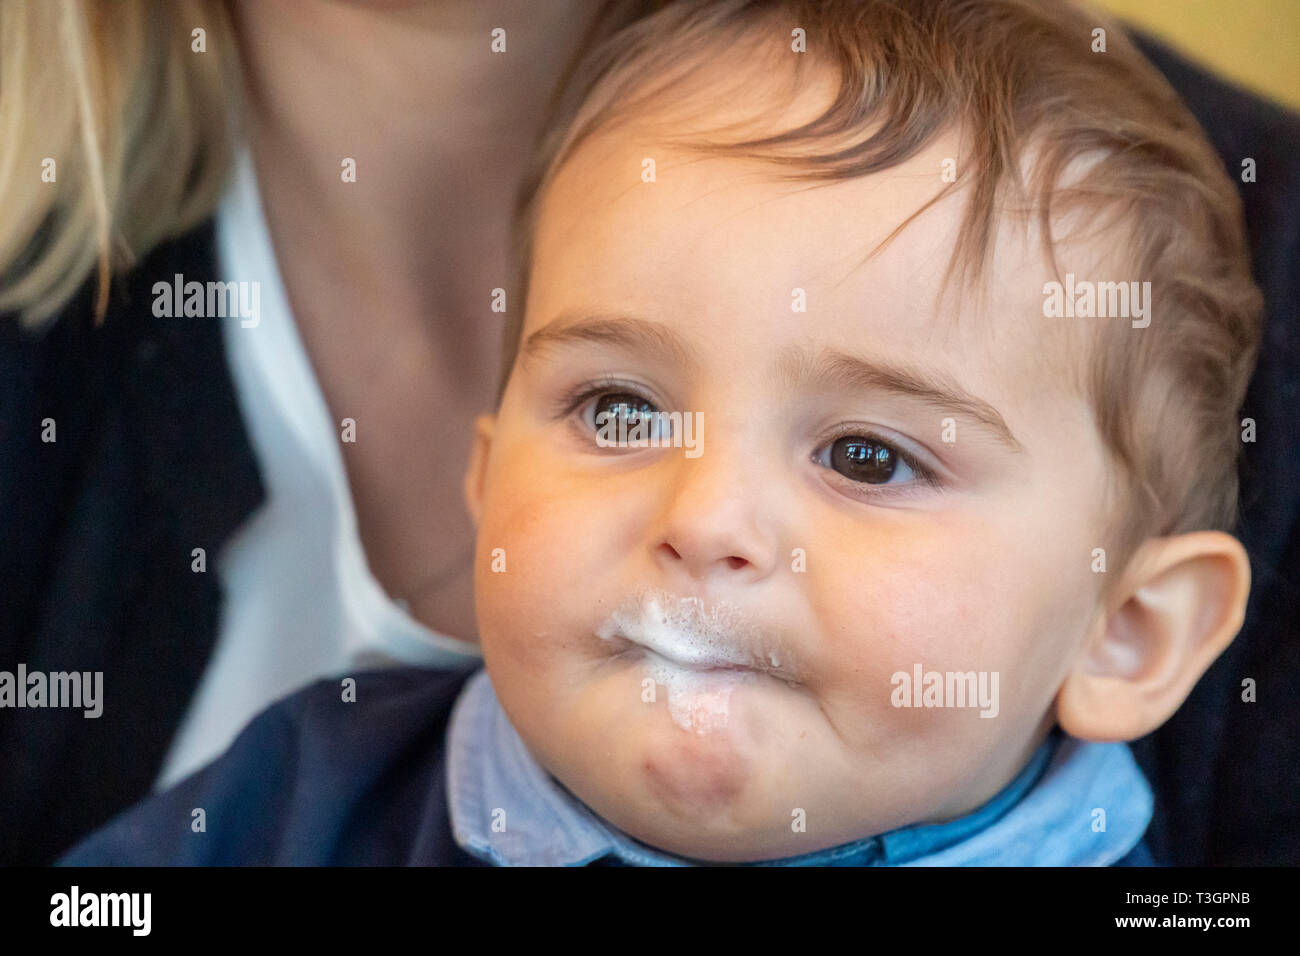 Very cute baby boy with milk mustache smiling at the camera Stock ...